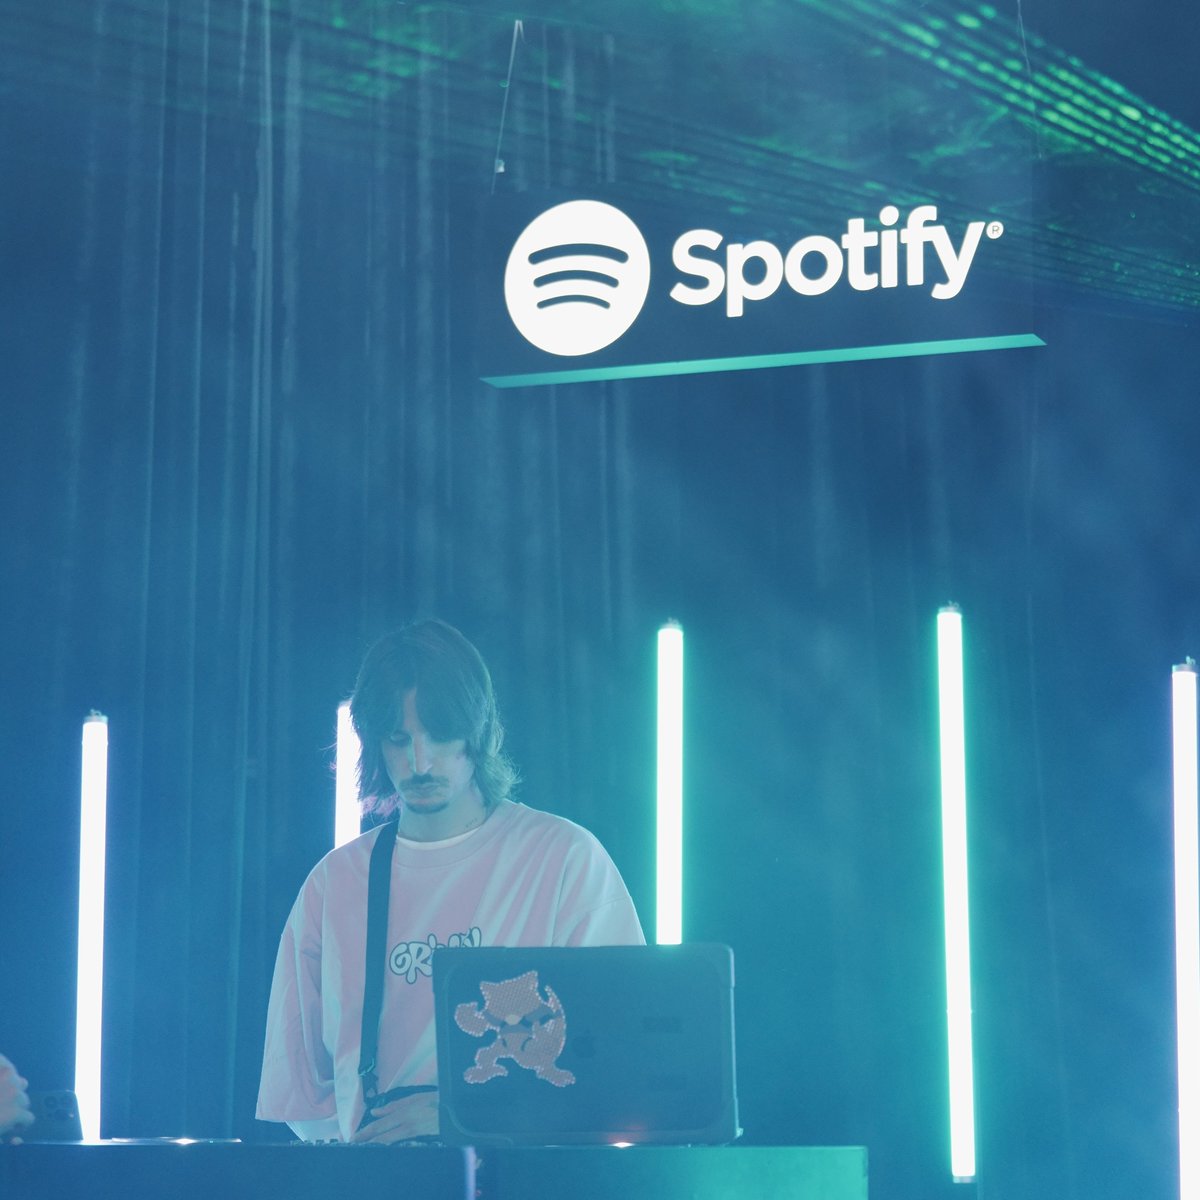 SpotifyColombia tweet picture